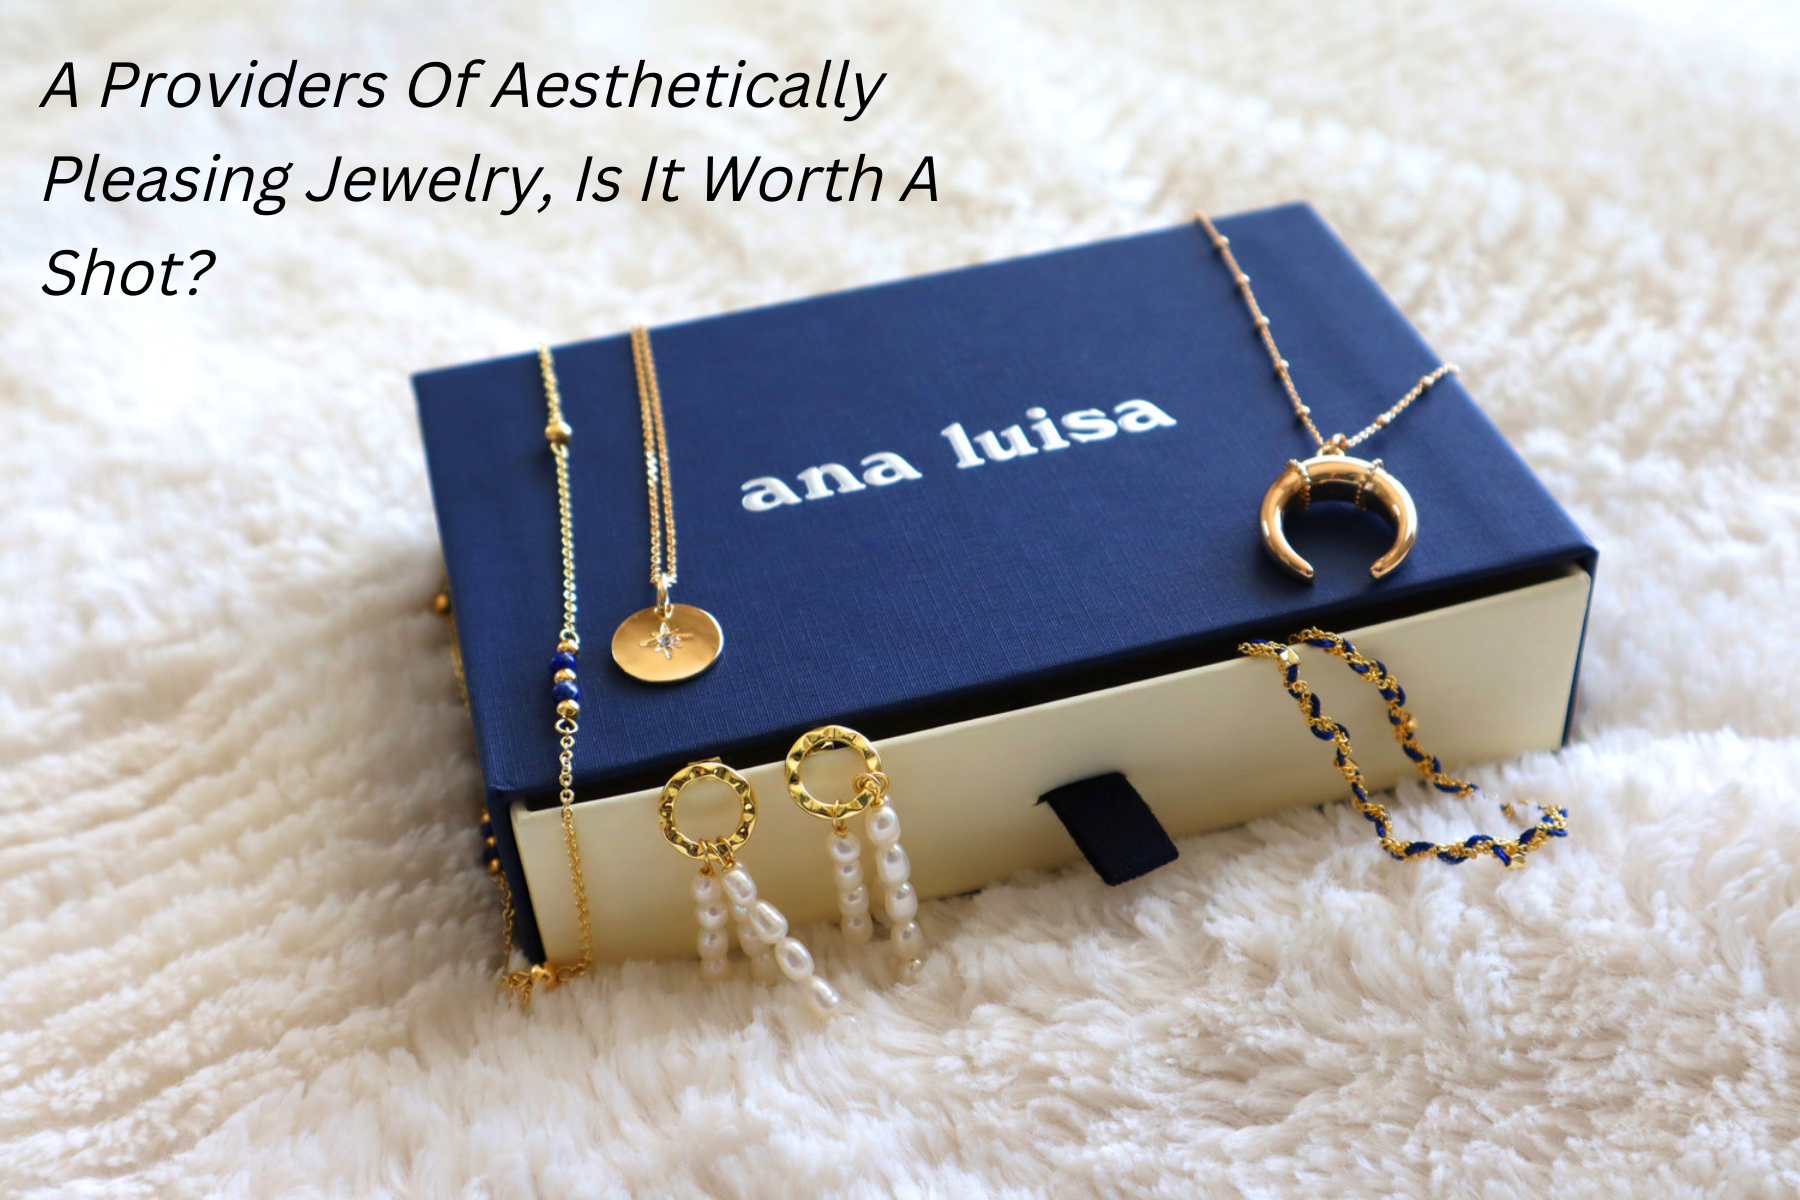 Ana Luisa - A Providers Of Aesthetically Pleasing Jewelry